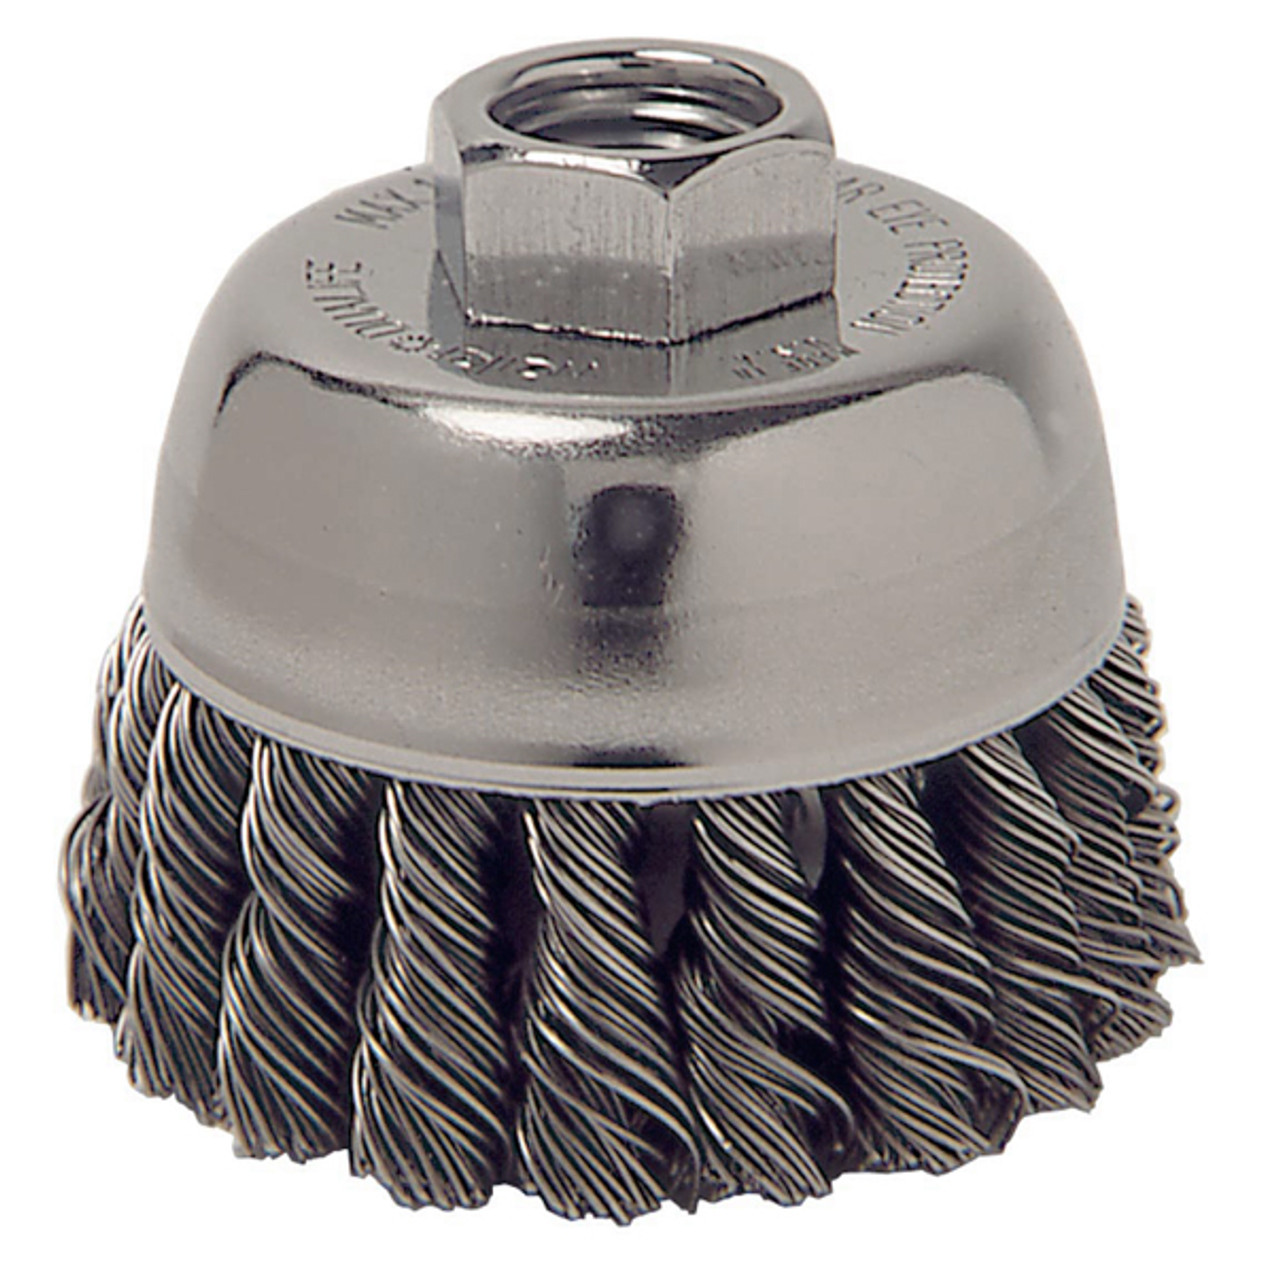 4? Knot-Style Cup Brush